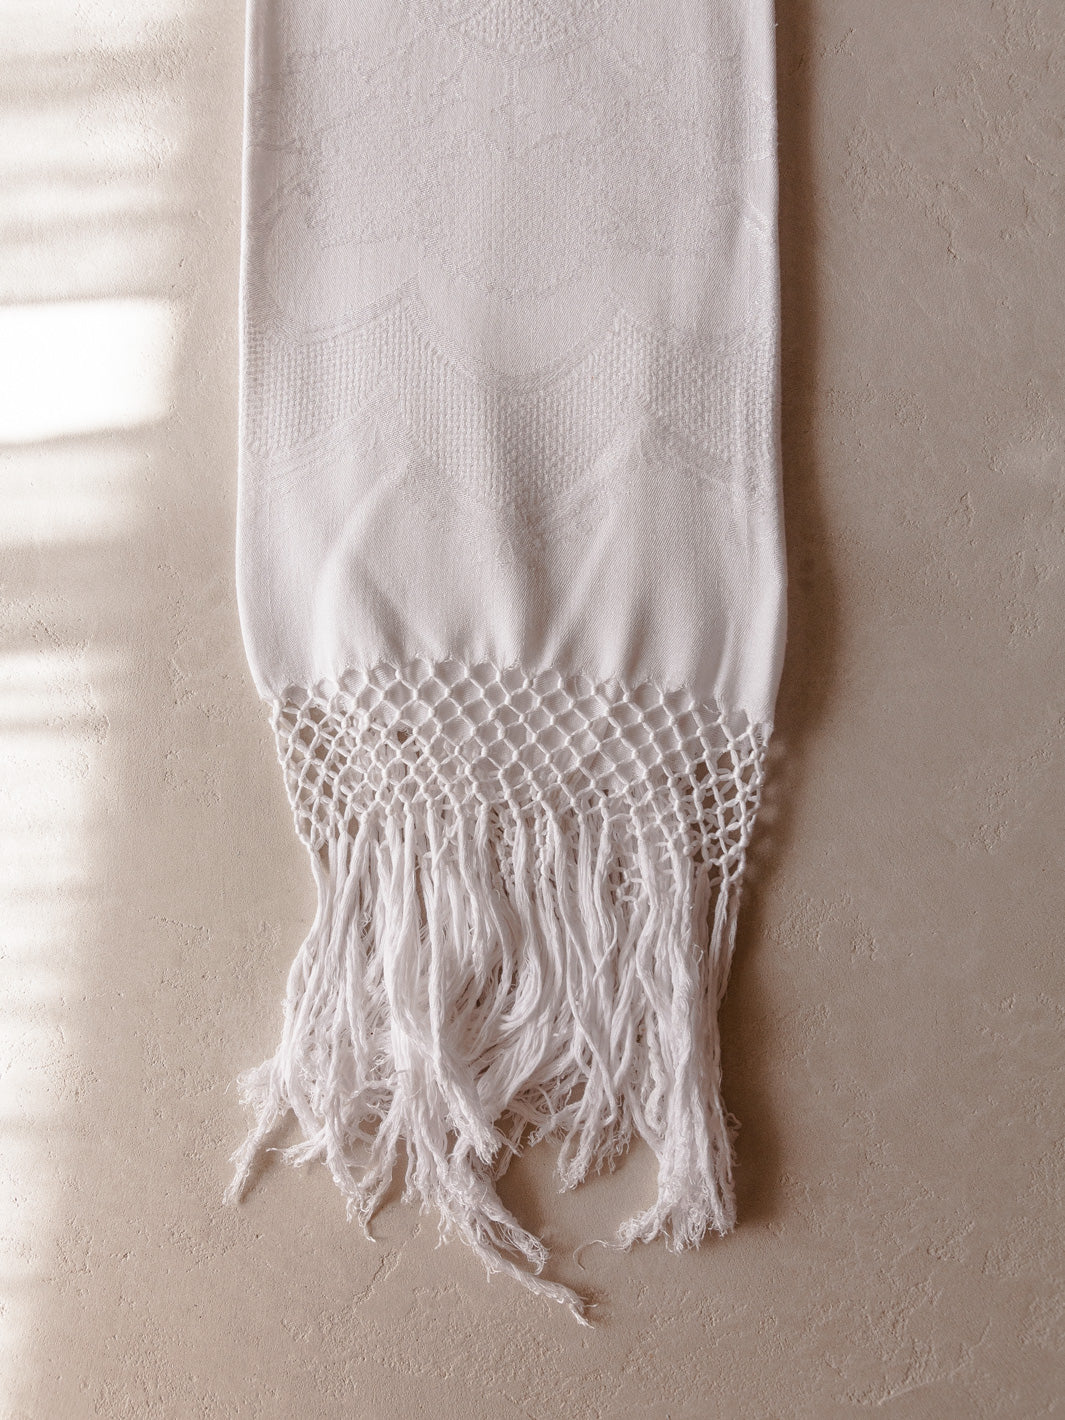 40s embroidered Italian damask towel